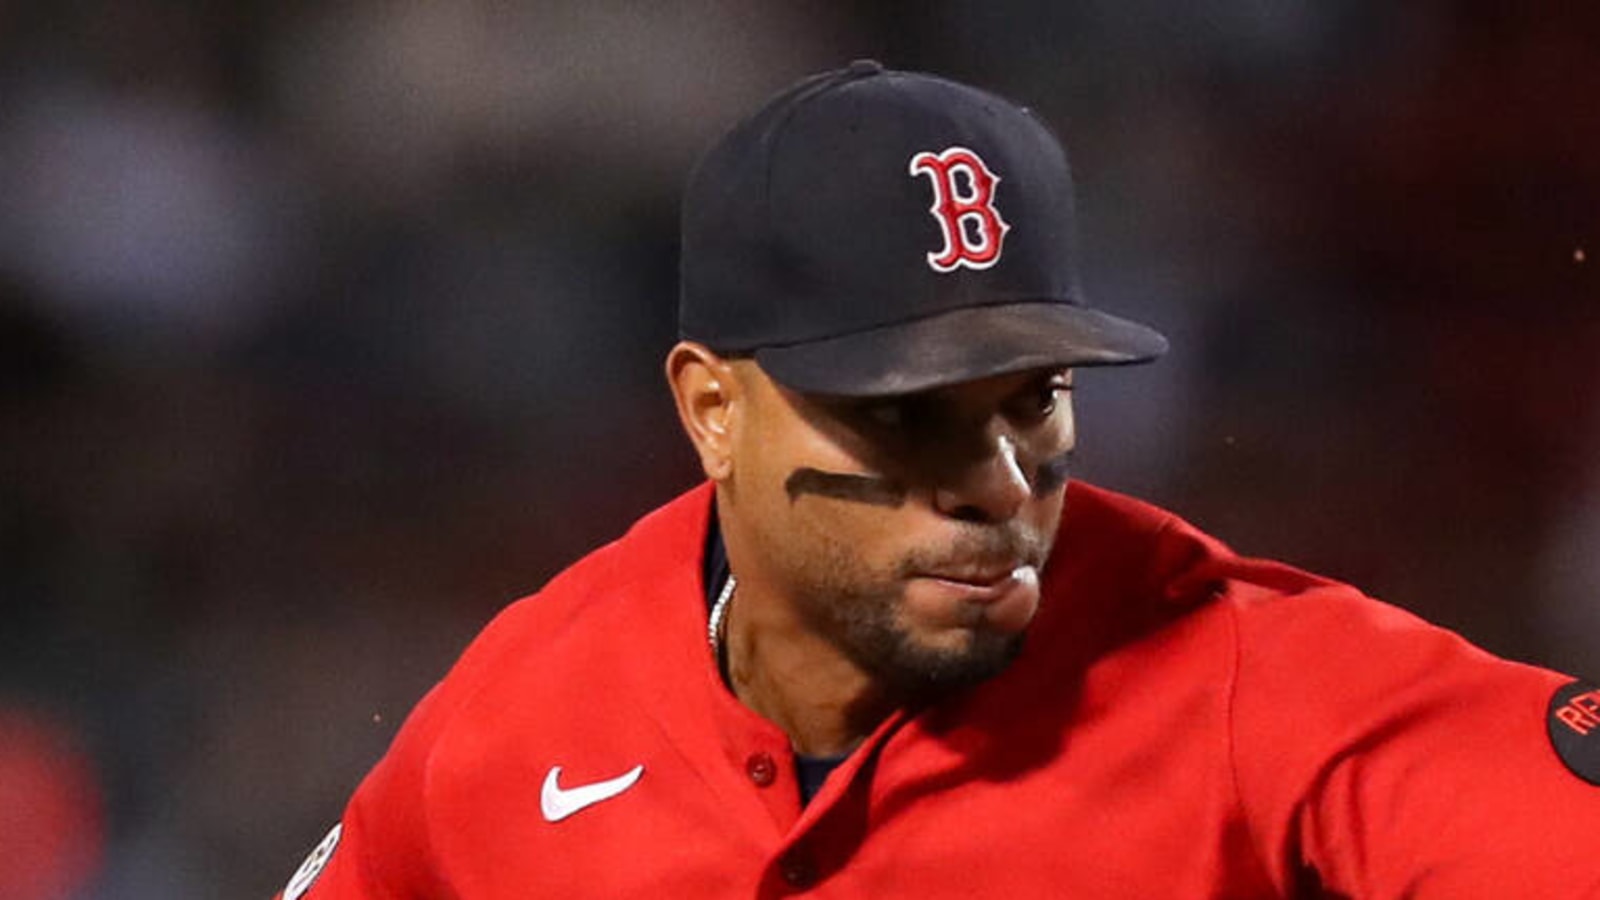 Padres sign Bogaerts to monster 11-year deal